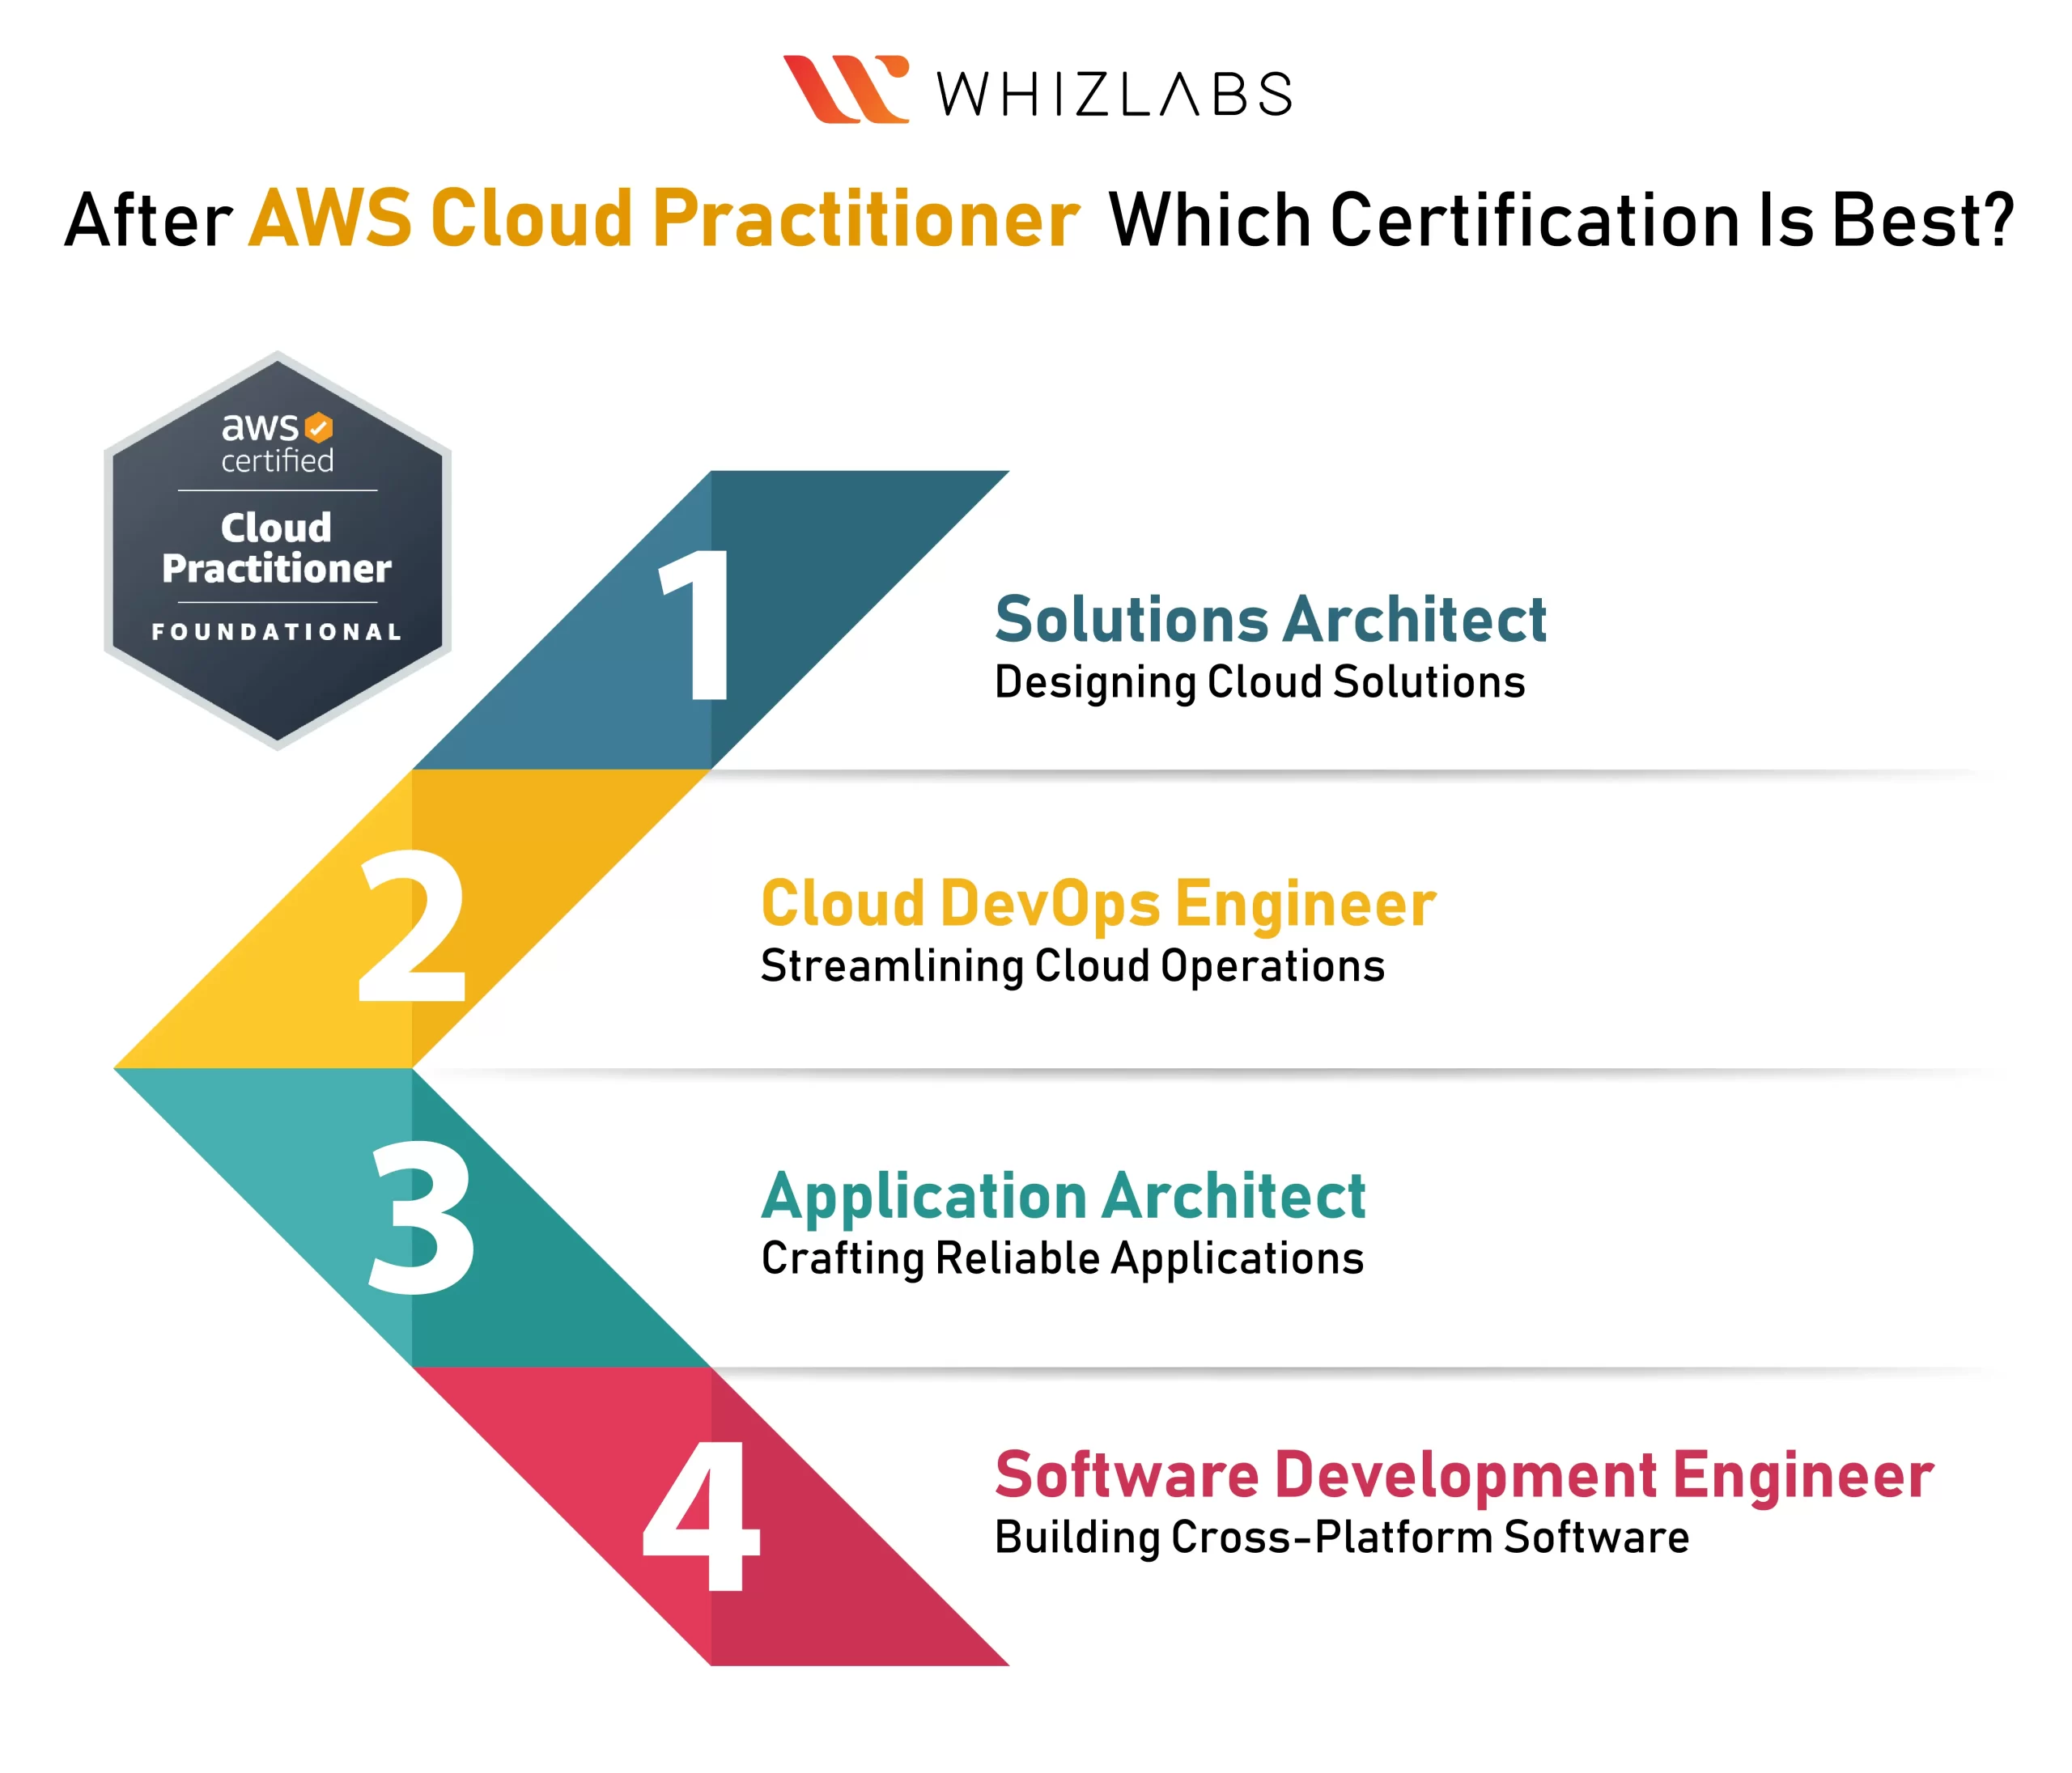 AWS cloud practitioner